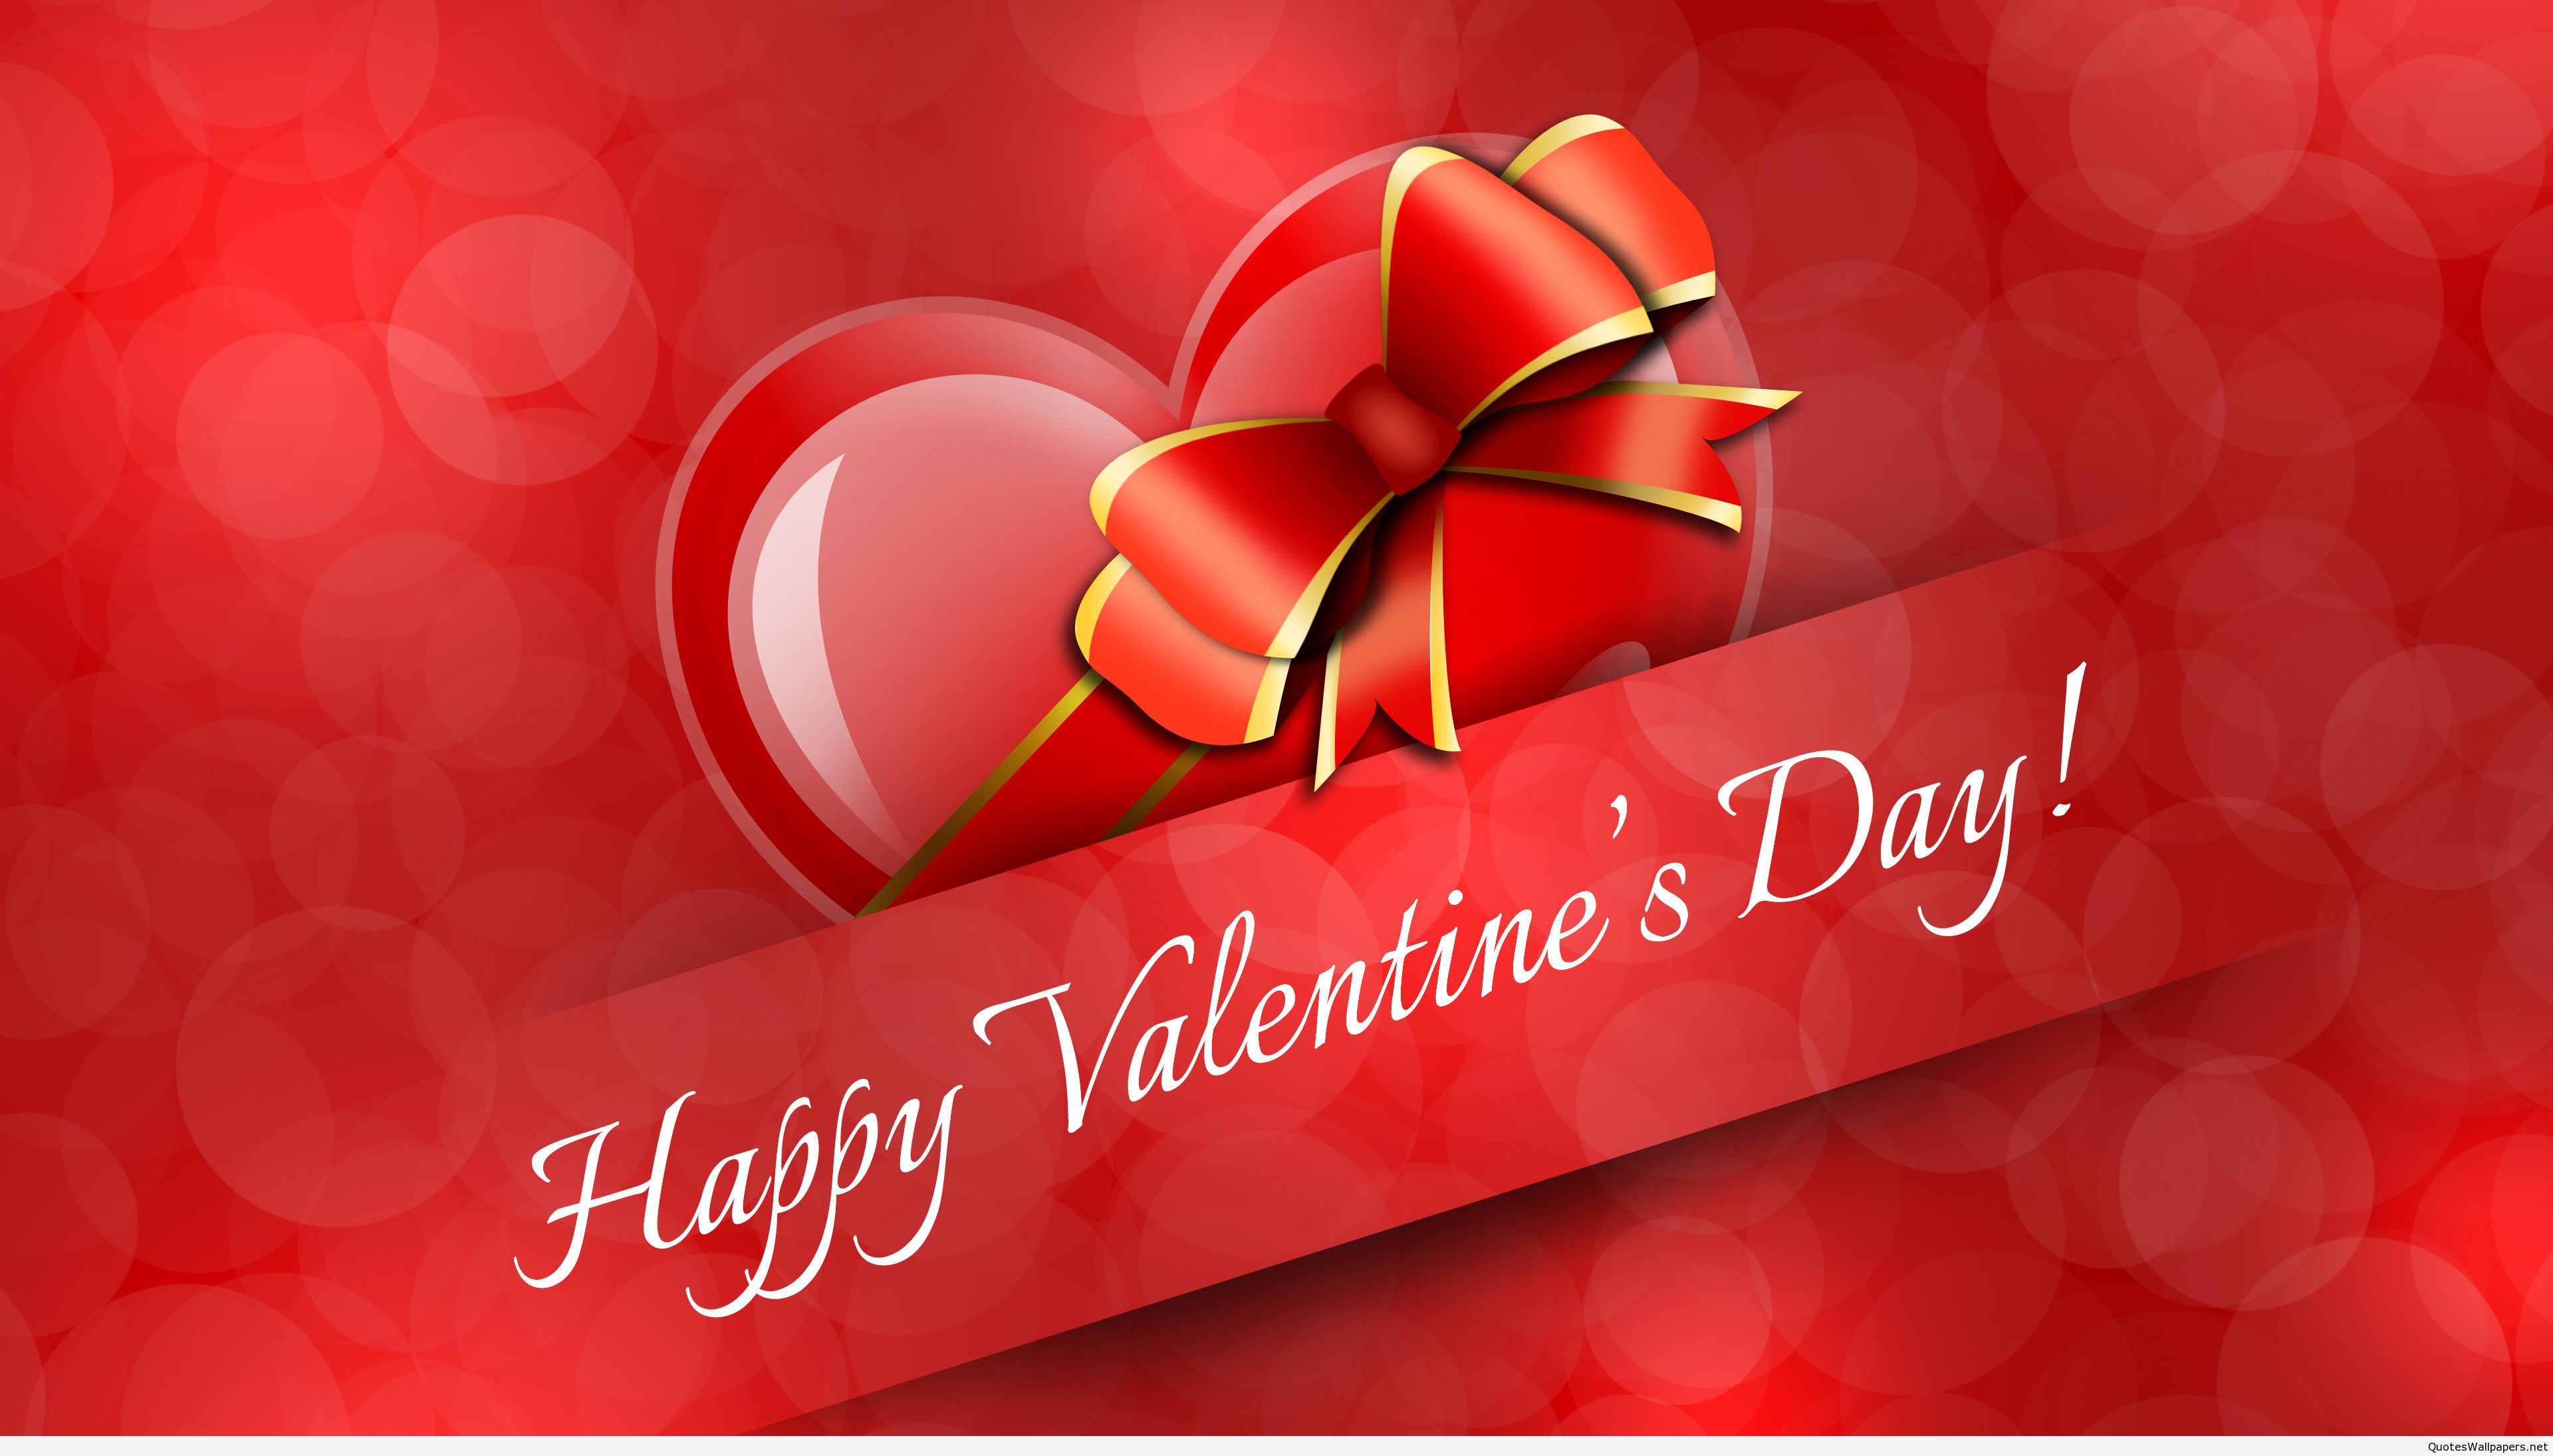 Top Valentine's day mobile wallpapers to download 2016